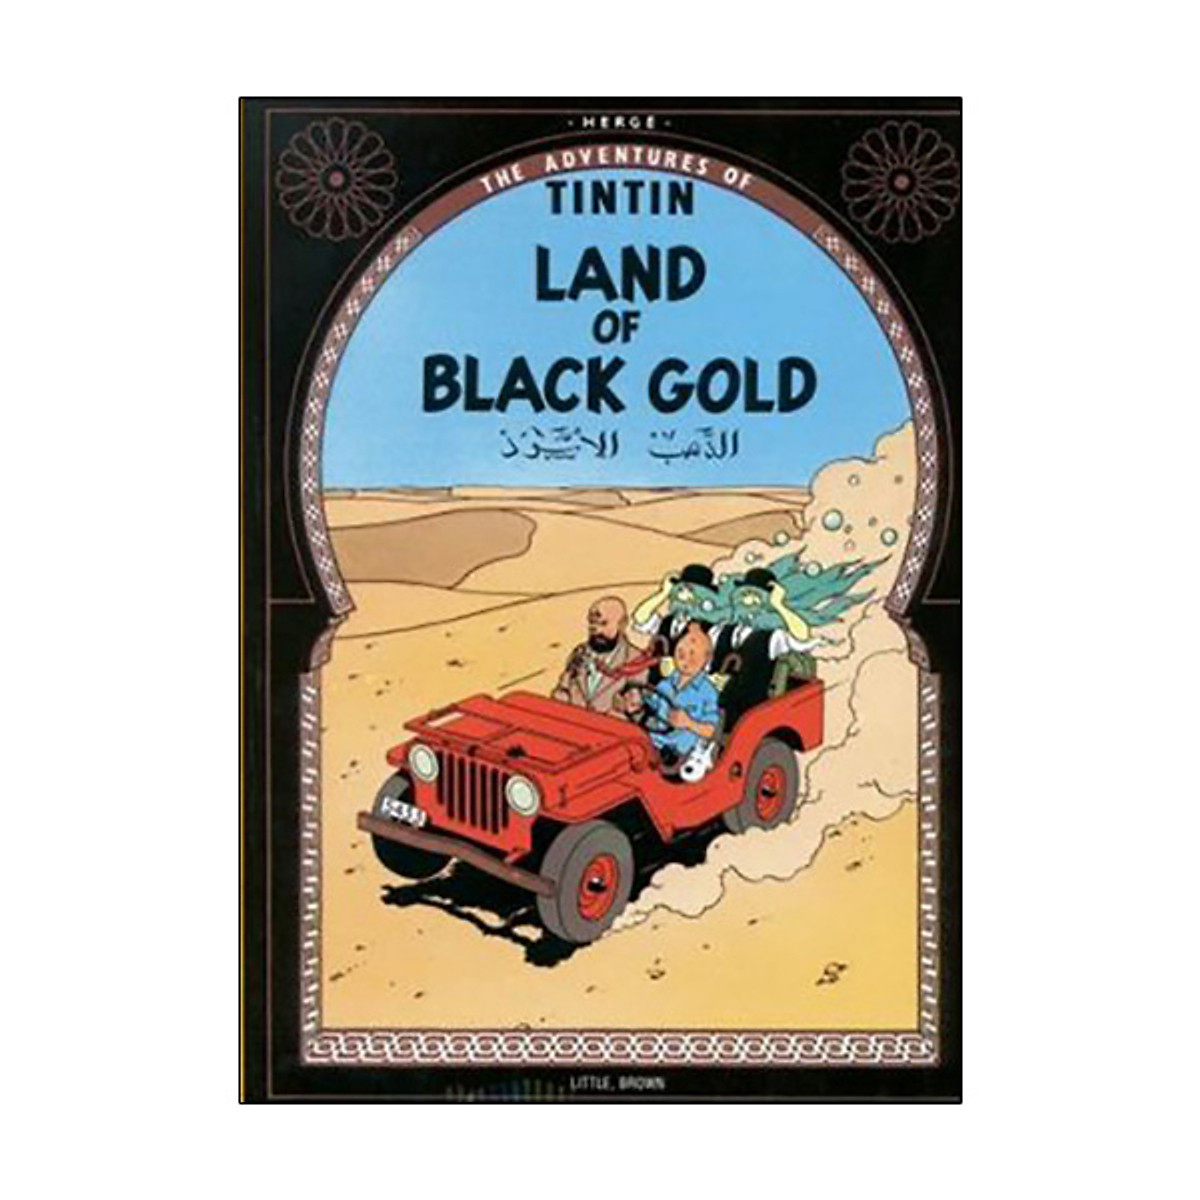 The Adventures of Tintin: Land of the Black Gold